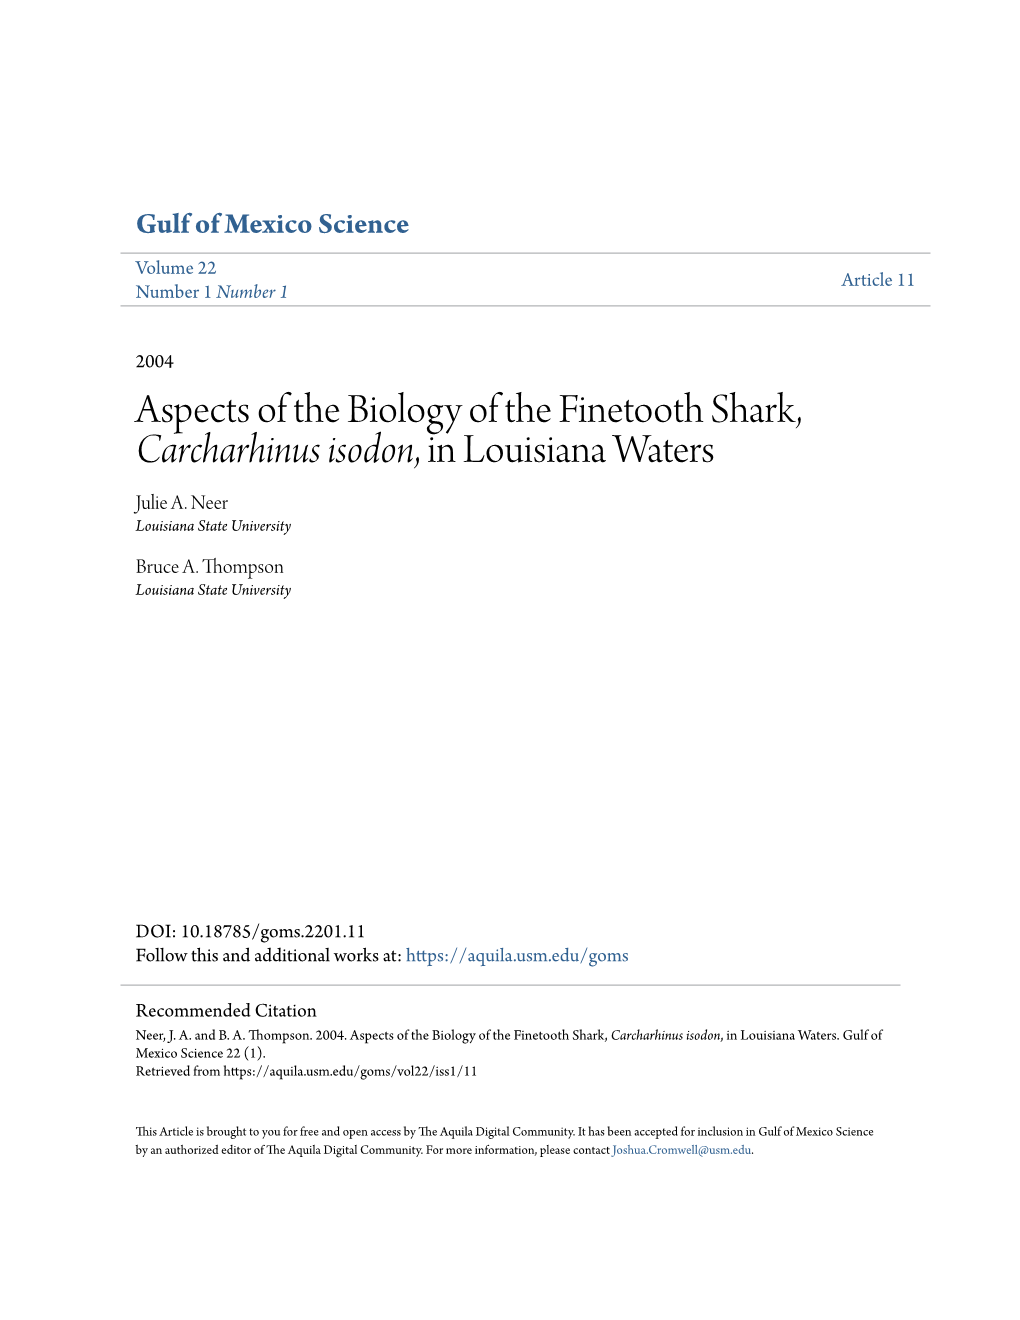 Aspects of the Biology of the Finetooth Shark, Carcharhinus Isodon, in Louisiana Waters Julie A